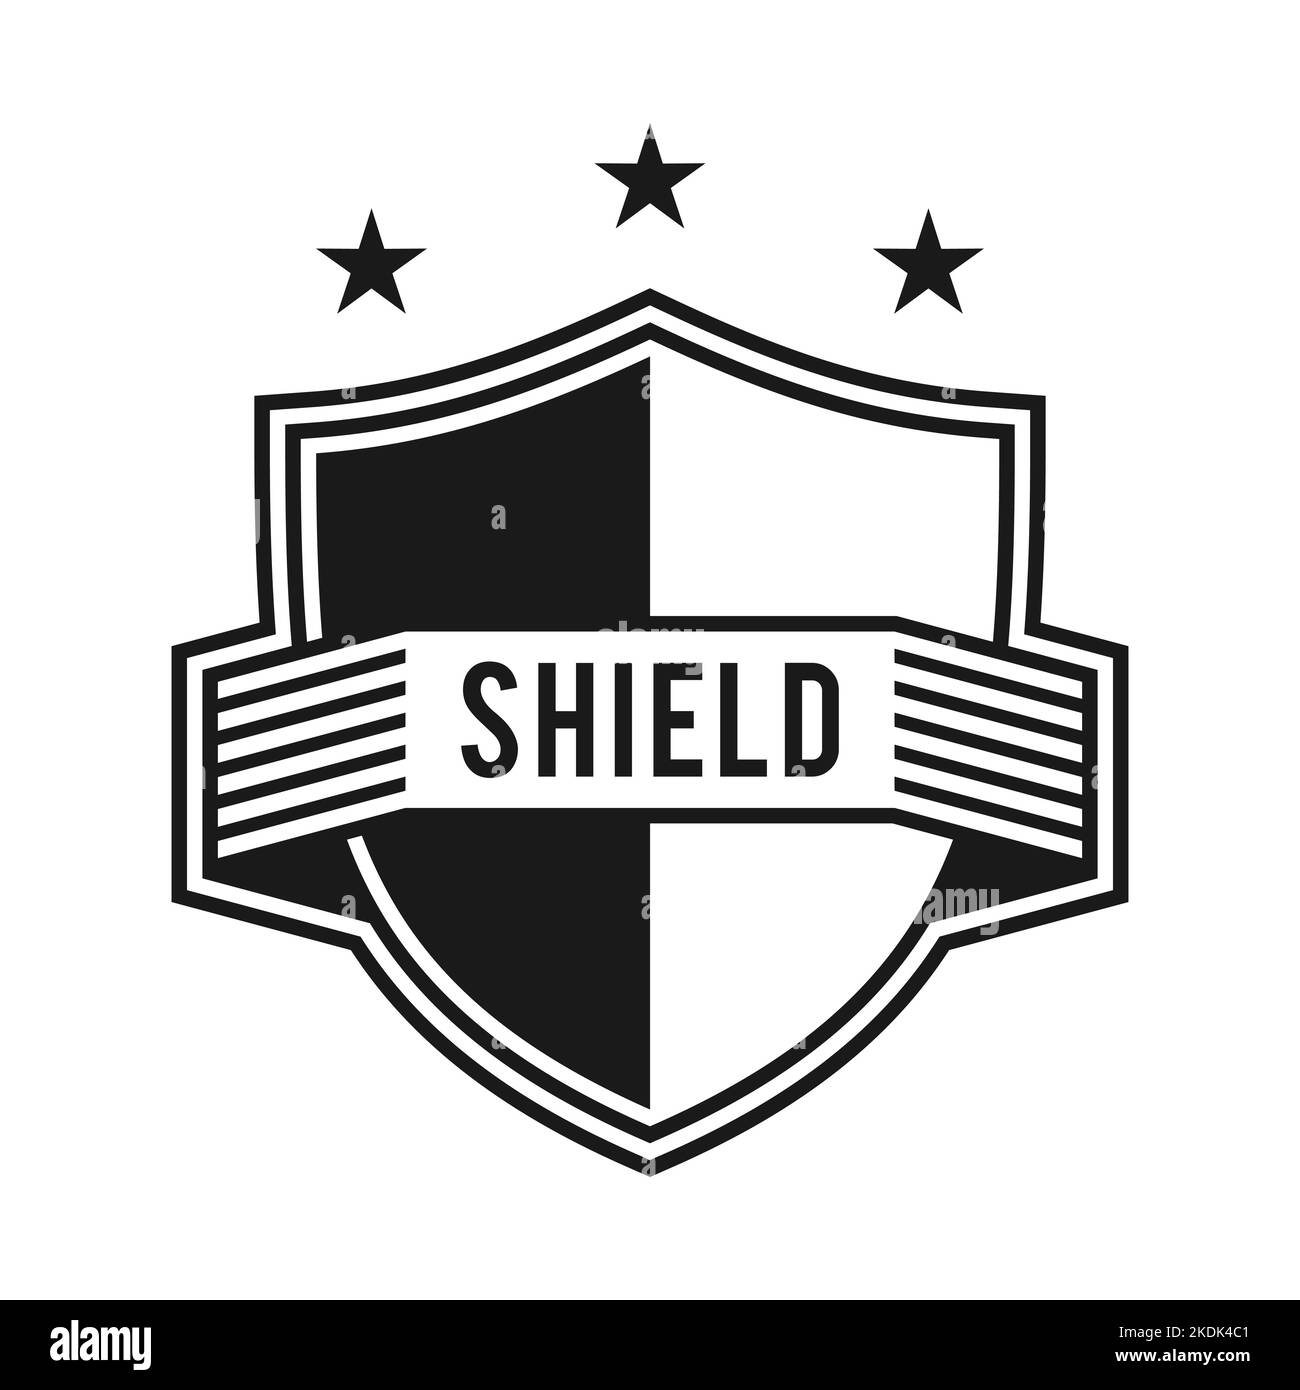 Shield logo design template with three star. Sport team emblem with ribbon and place for text. Retro shaped monochrome badge. Vector illustration. Stock Vector